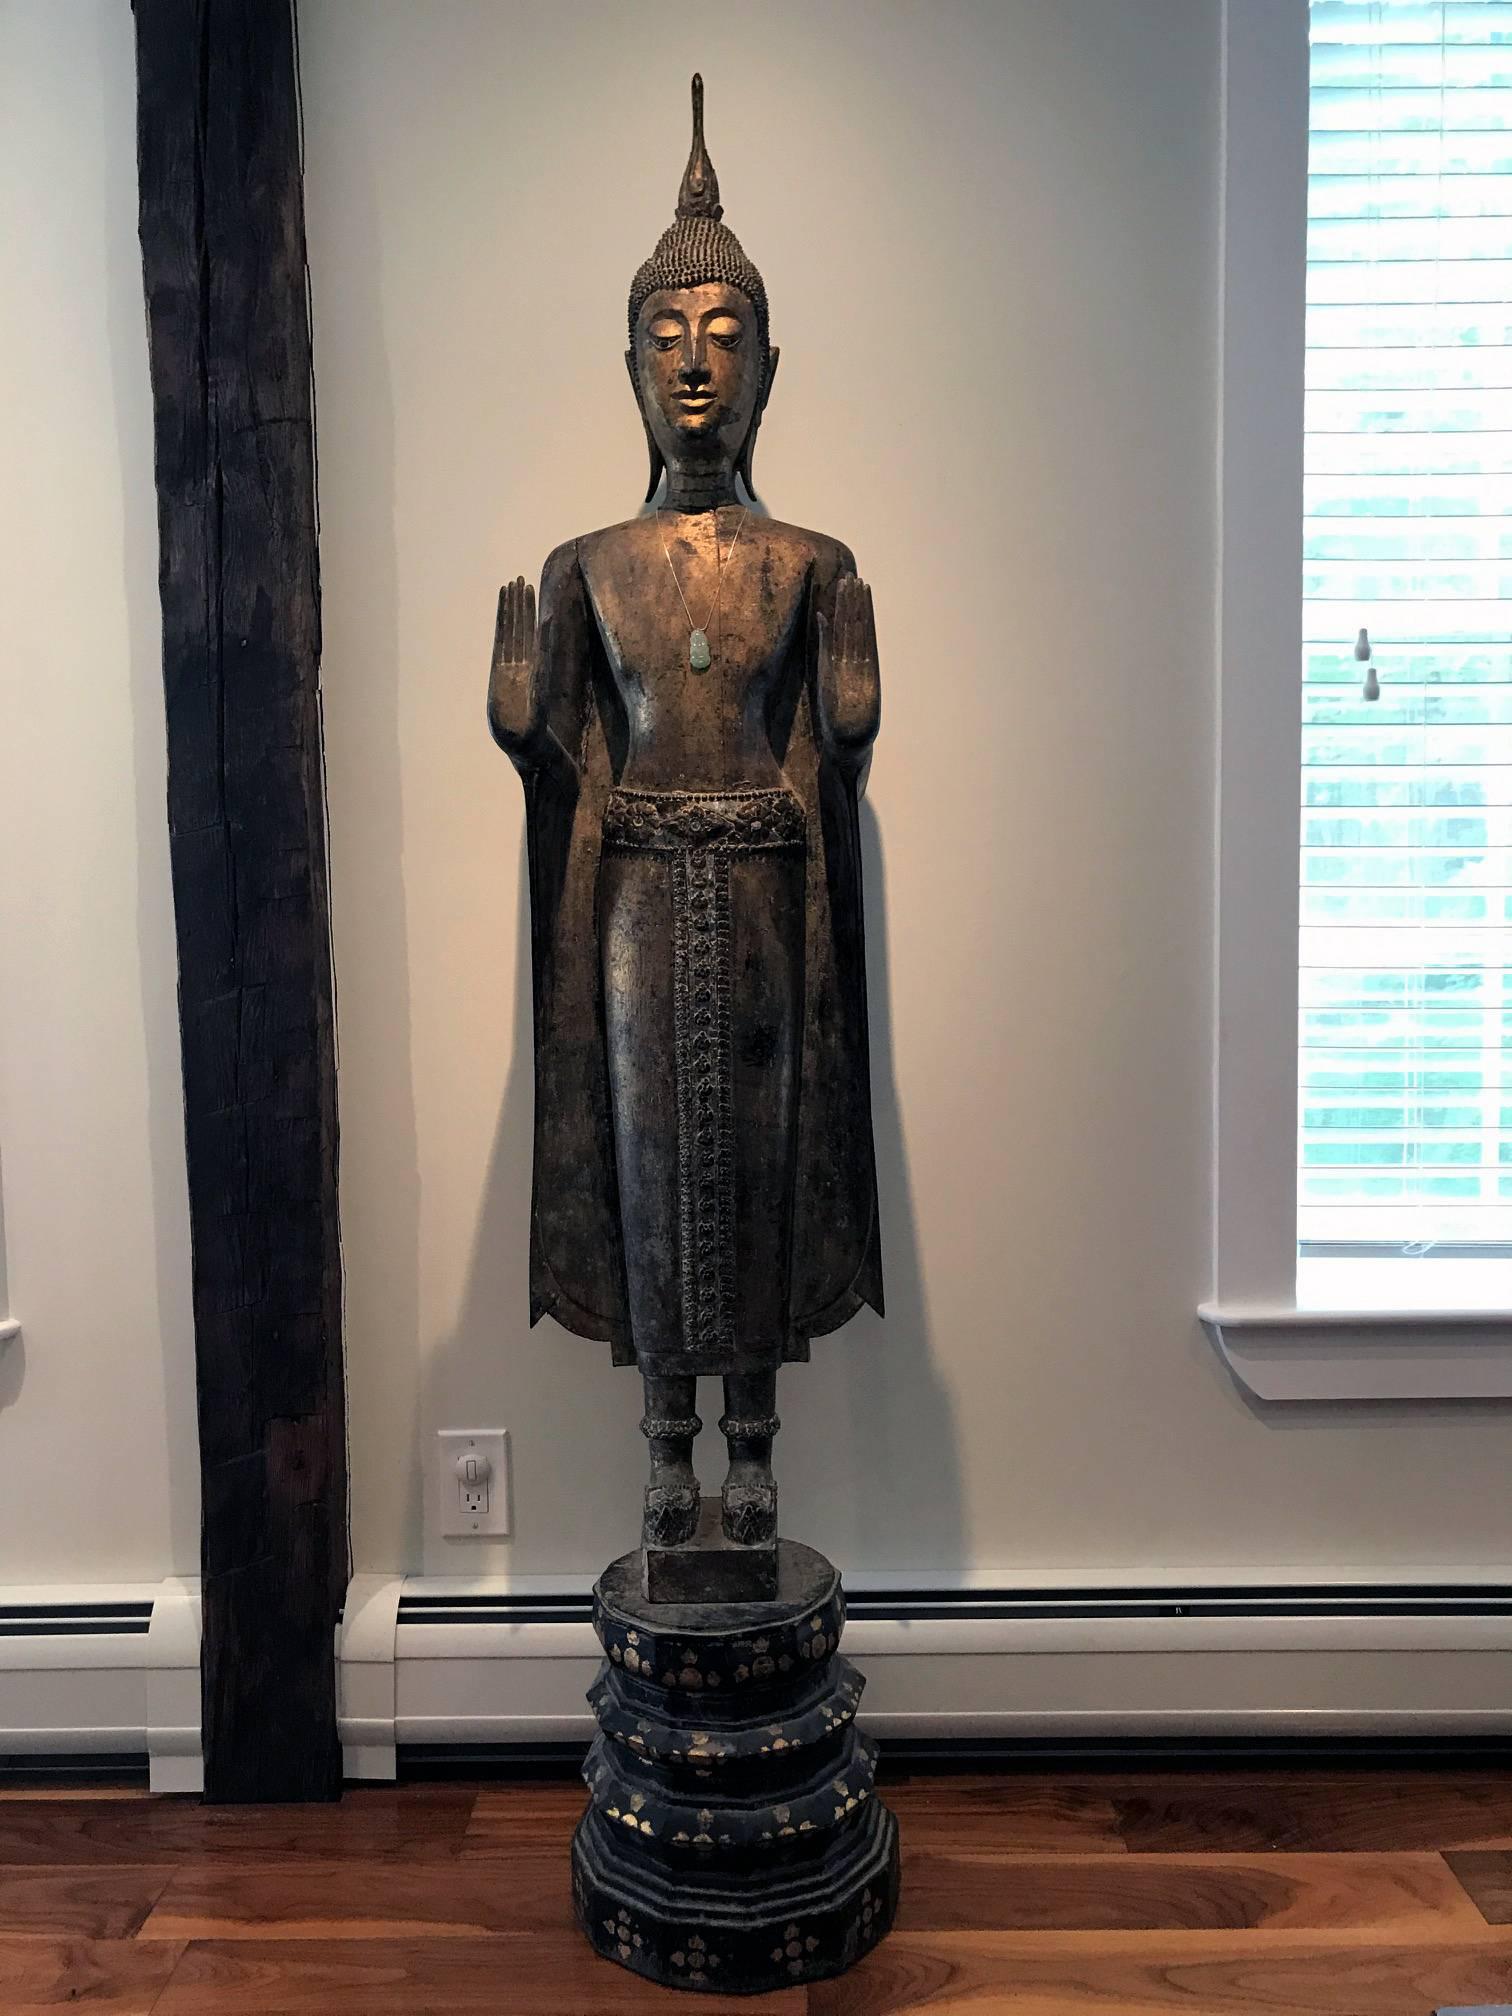 This wood Buddha in standing position was executed in a typical Laotian style, which features a slim and elongated body and extremely serene facial expression. His hands are in the gesture of double Abhaya mudra. This mudra symbolizes the act of